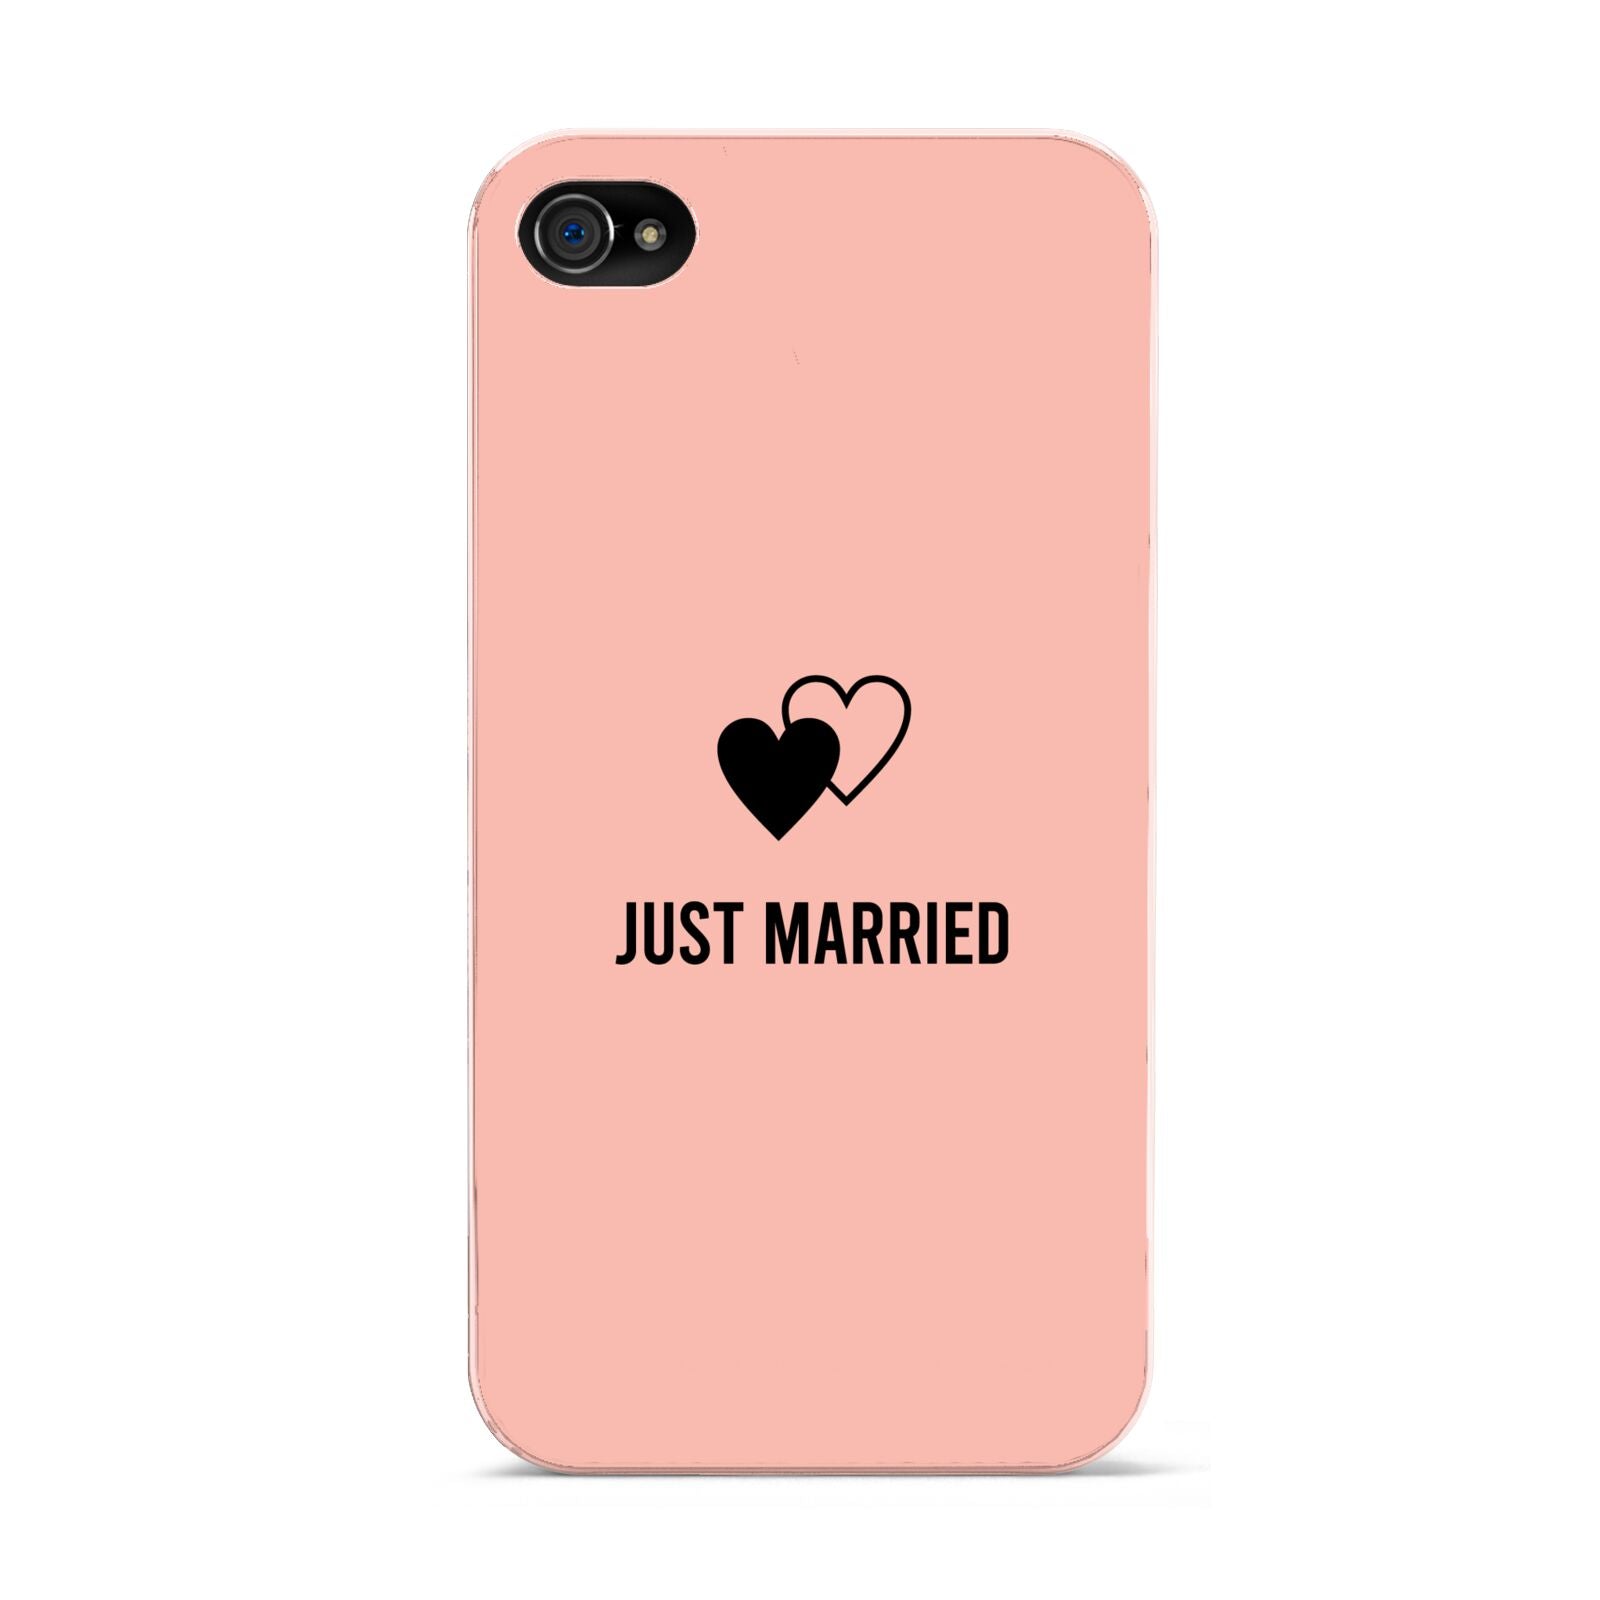 Just Married Apple iPhone 4s Case